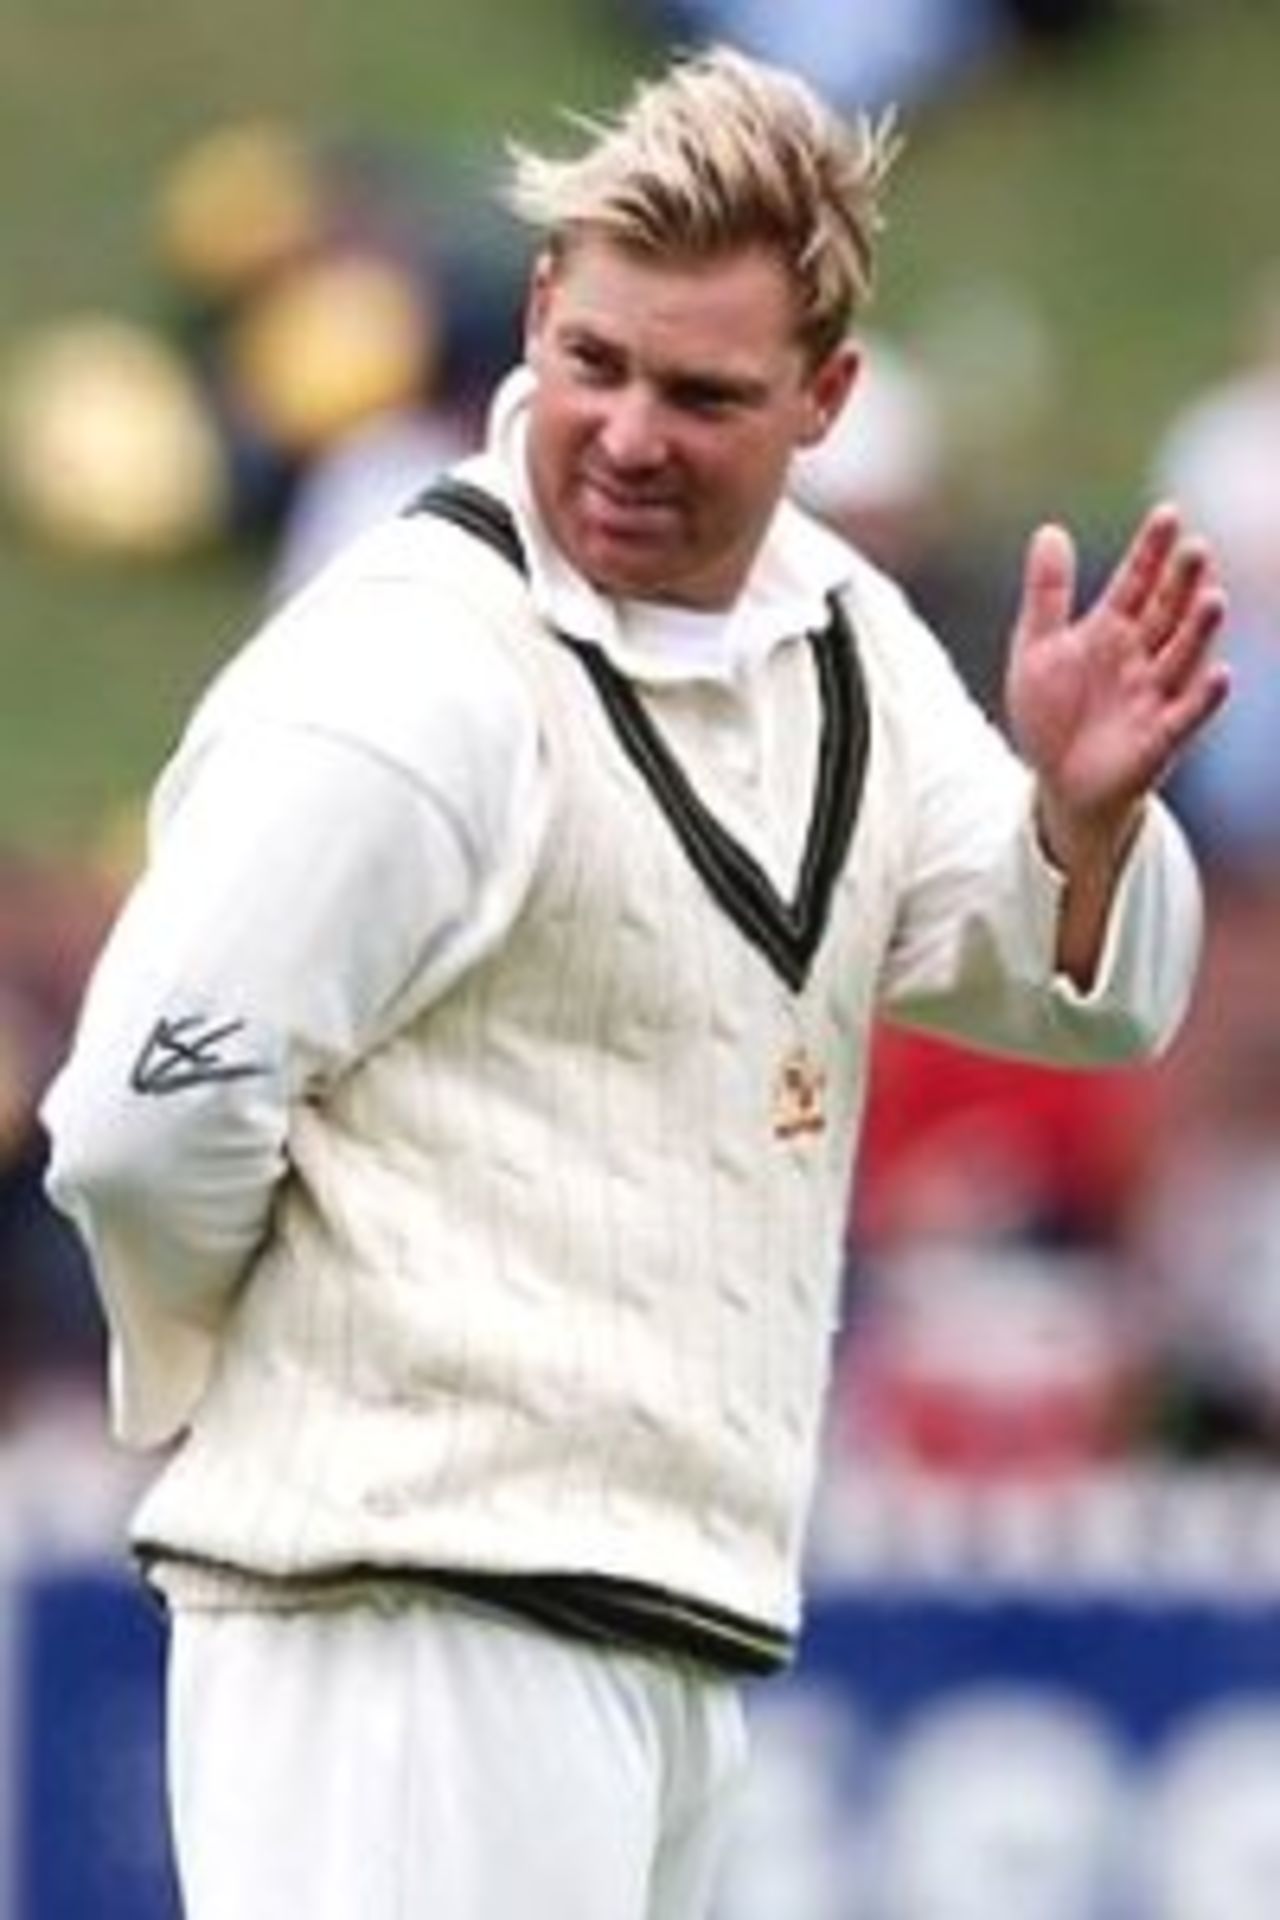 26 Mar 2000: Shane Warne of Australia waves to his daughter Brooke watching in the crowd, during day three of the second test between New Zealand and Australia at the Basin Reserve, Wellington, New Zealand.